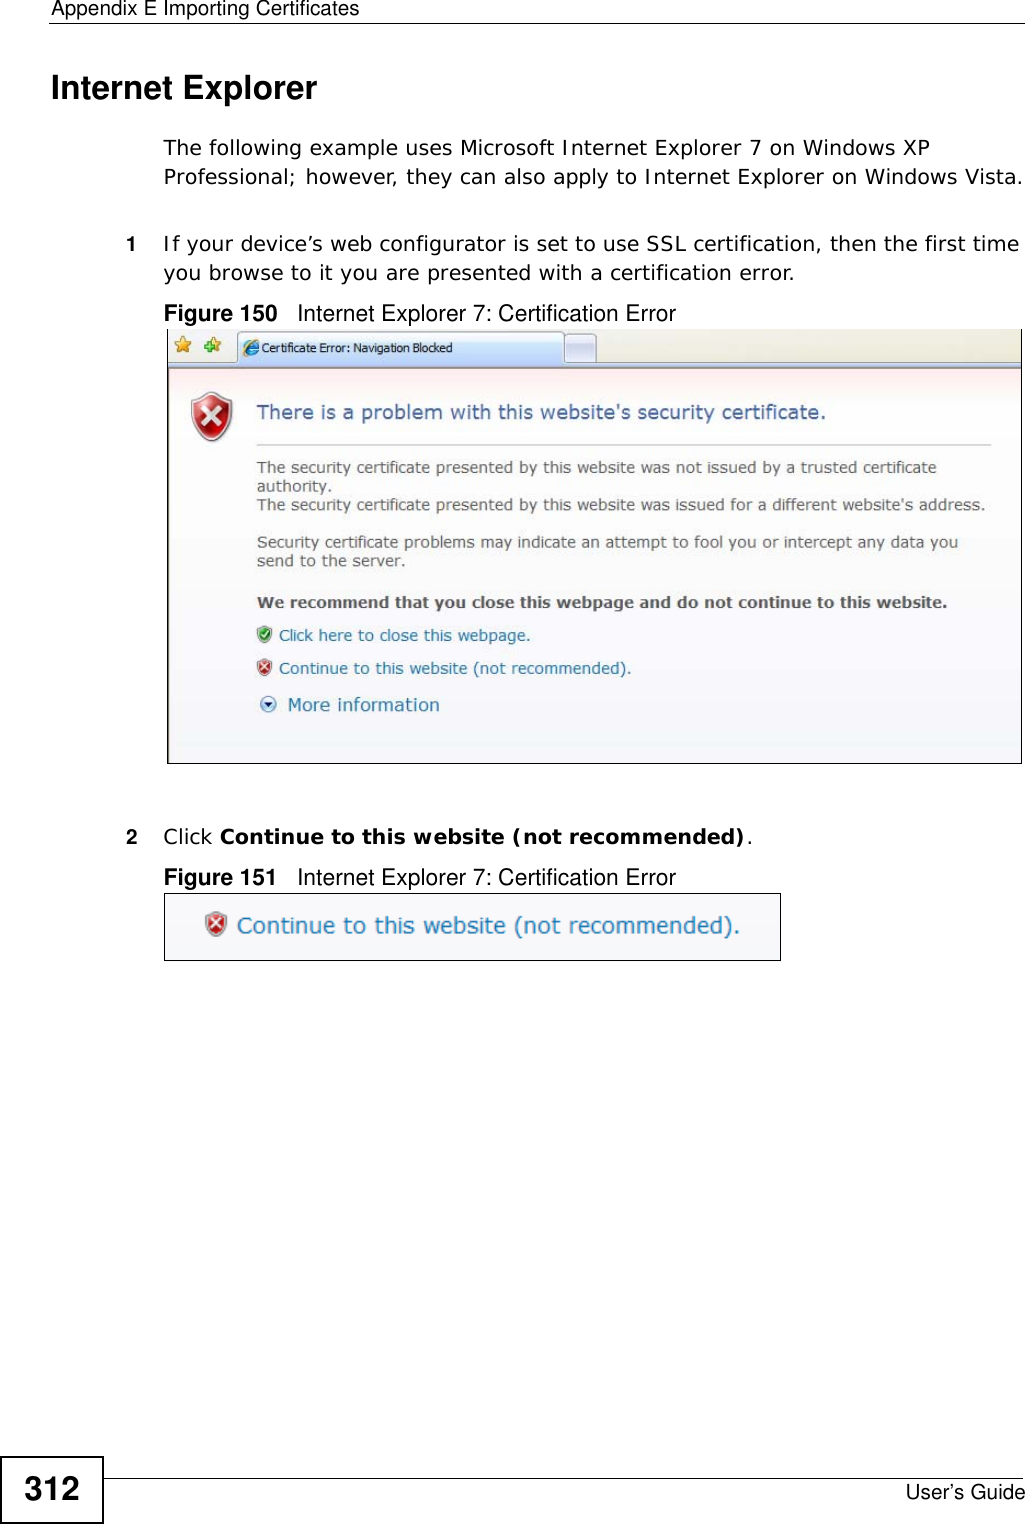 Appendix E Importing CertificatesUser’s Guide312Internet ExplorerThe following example uses Microsoft Internet Explorer 7 on Windows XP Professional; however, they can also apply to Internet Explorer on Windows Vista.1If your device’s web configurator is set to use SSL certification, then the first time you browse to it you are presented with a certification error.Figure 150   Internet Explorer 7: Certification Error2Click Continue to this website (not recommended).Figure 151   Internet Explorer 7: Certification Error